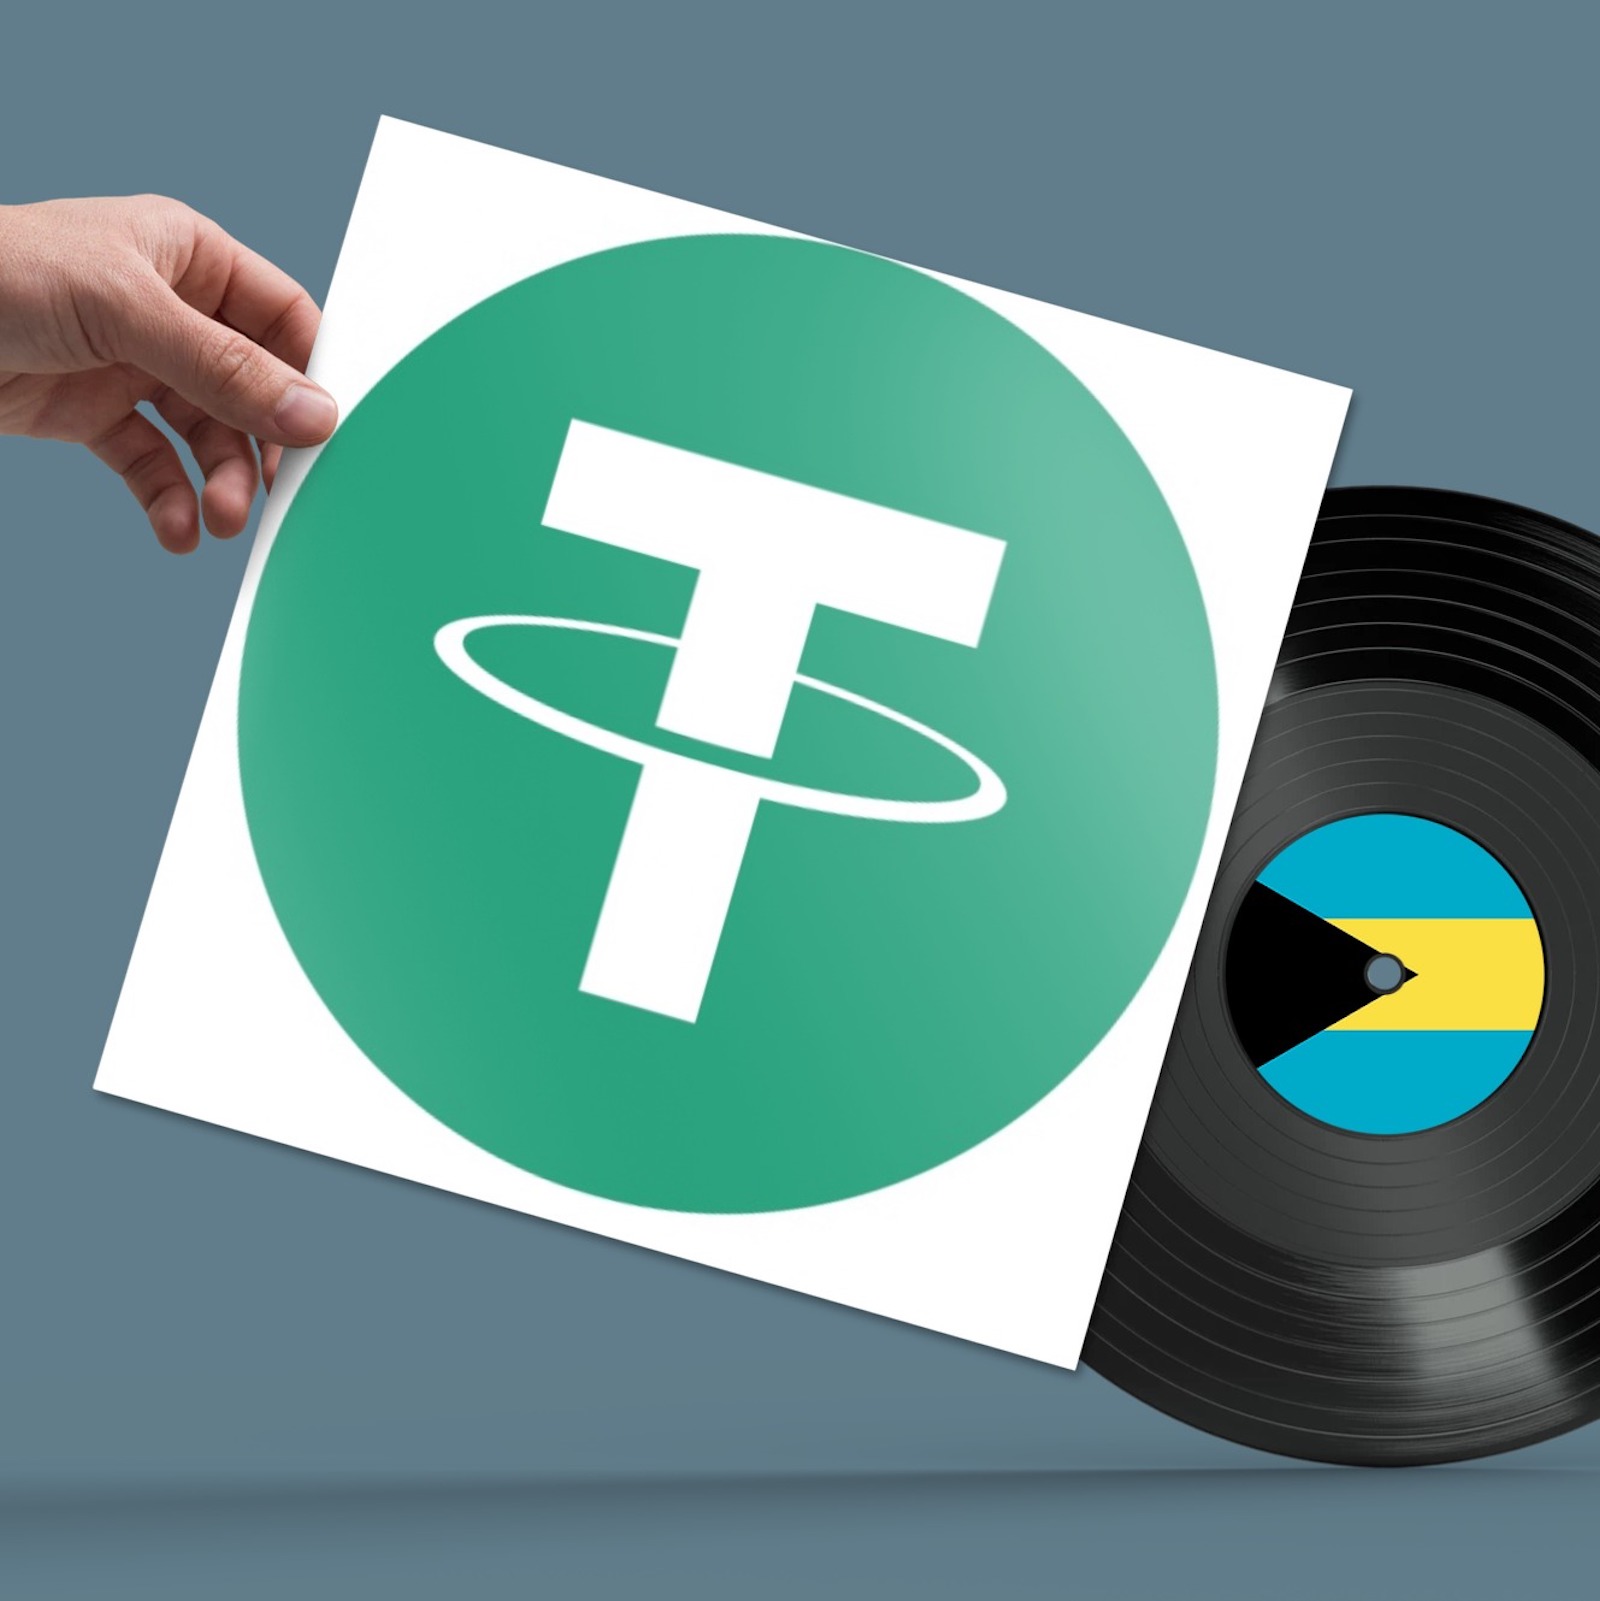 Tether Confirms New Bank and Claims to Have $1.8 Billion in Cash